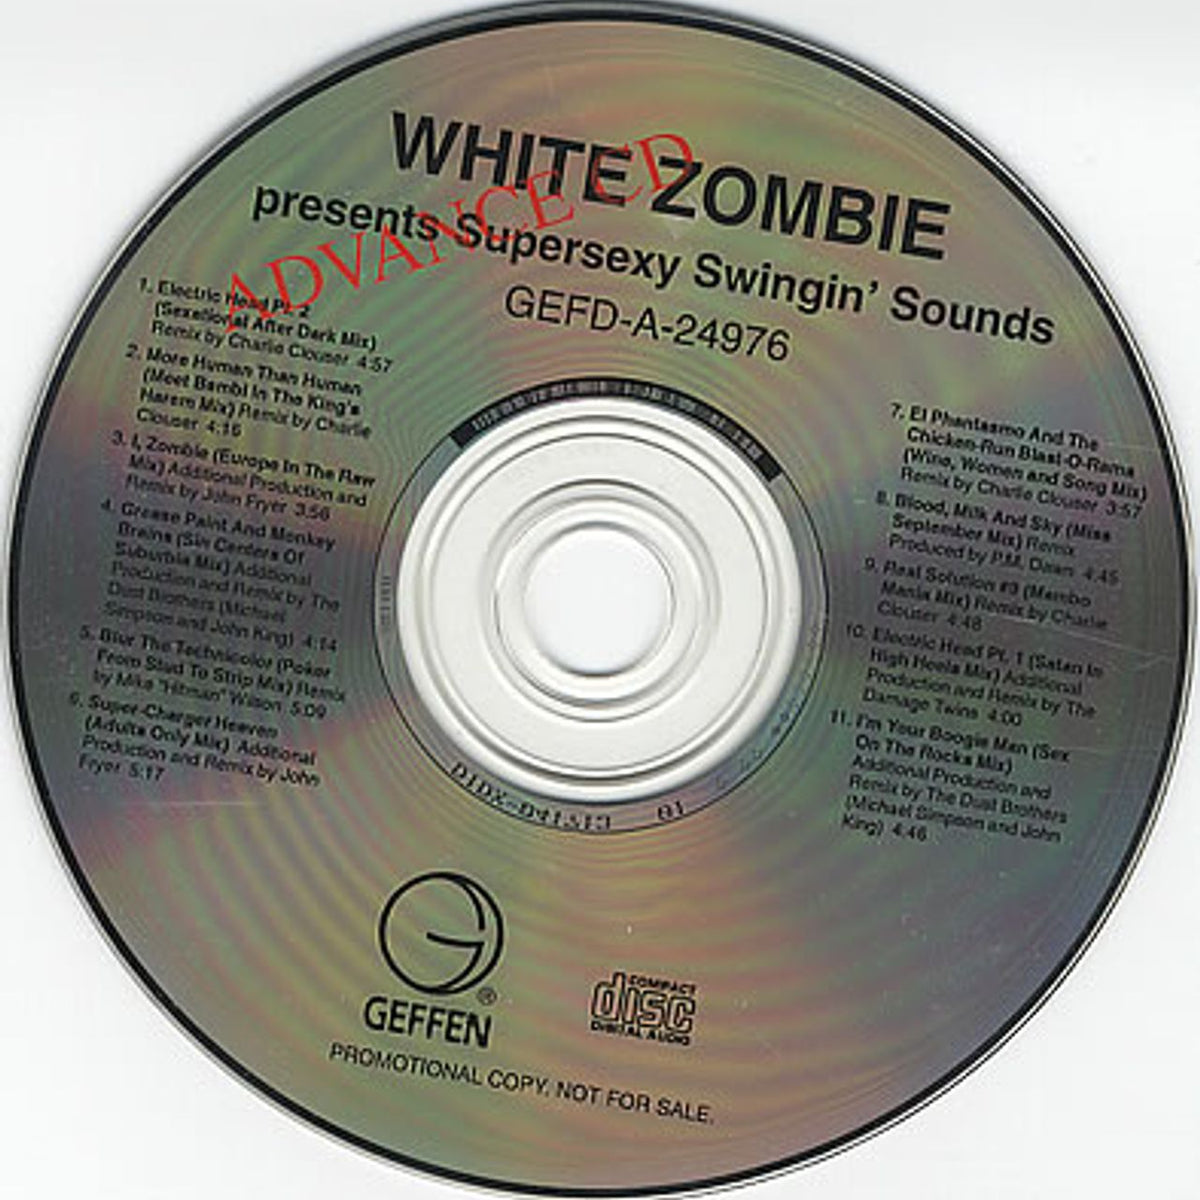 White Zombie Presents Supersexy Swingin' Sounds US Promo CD 